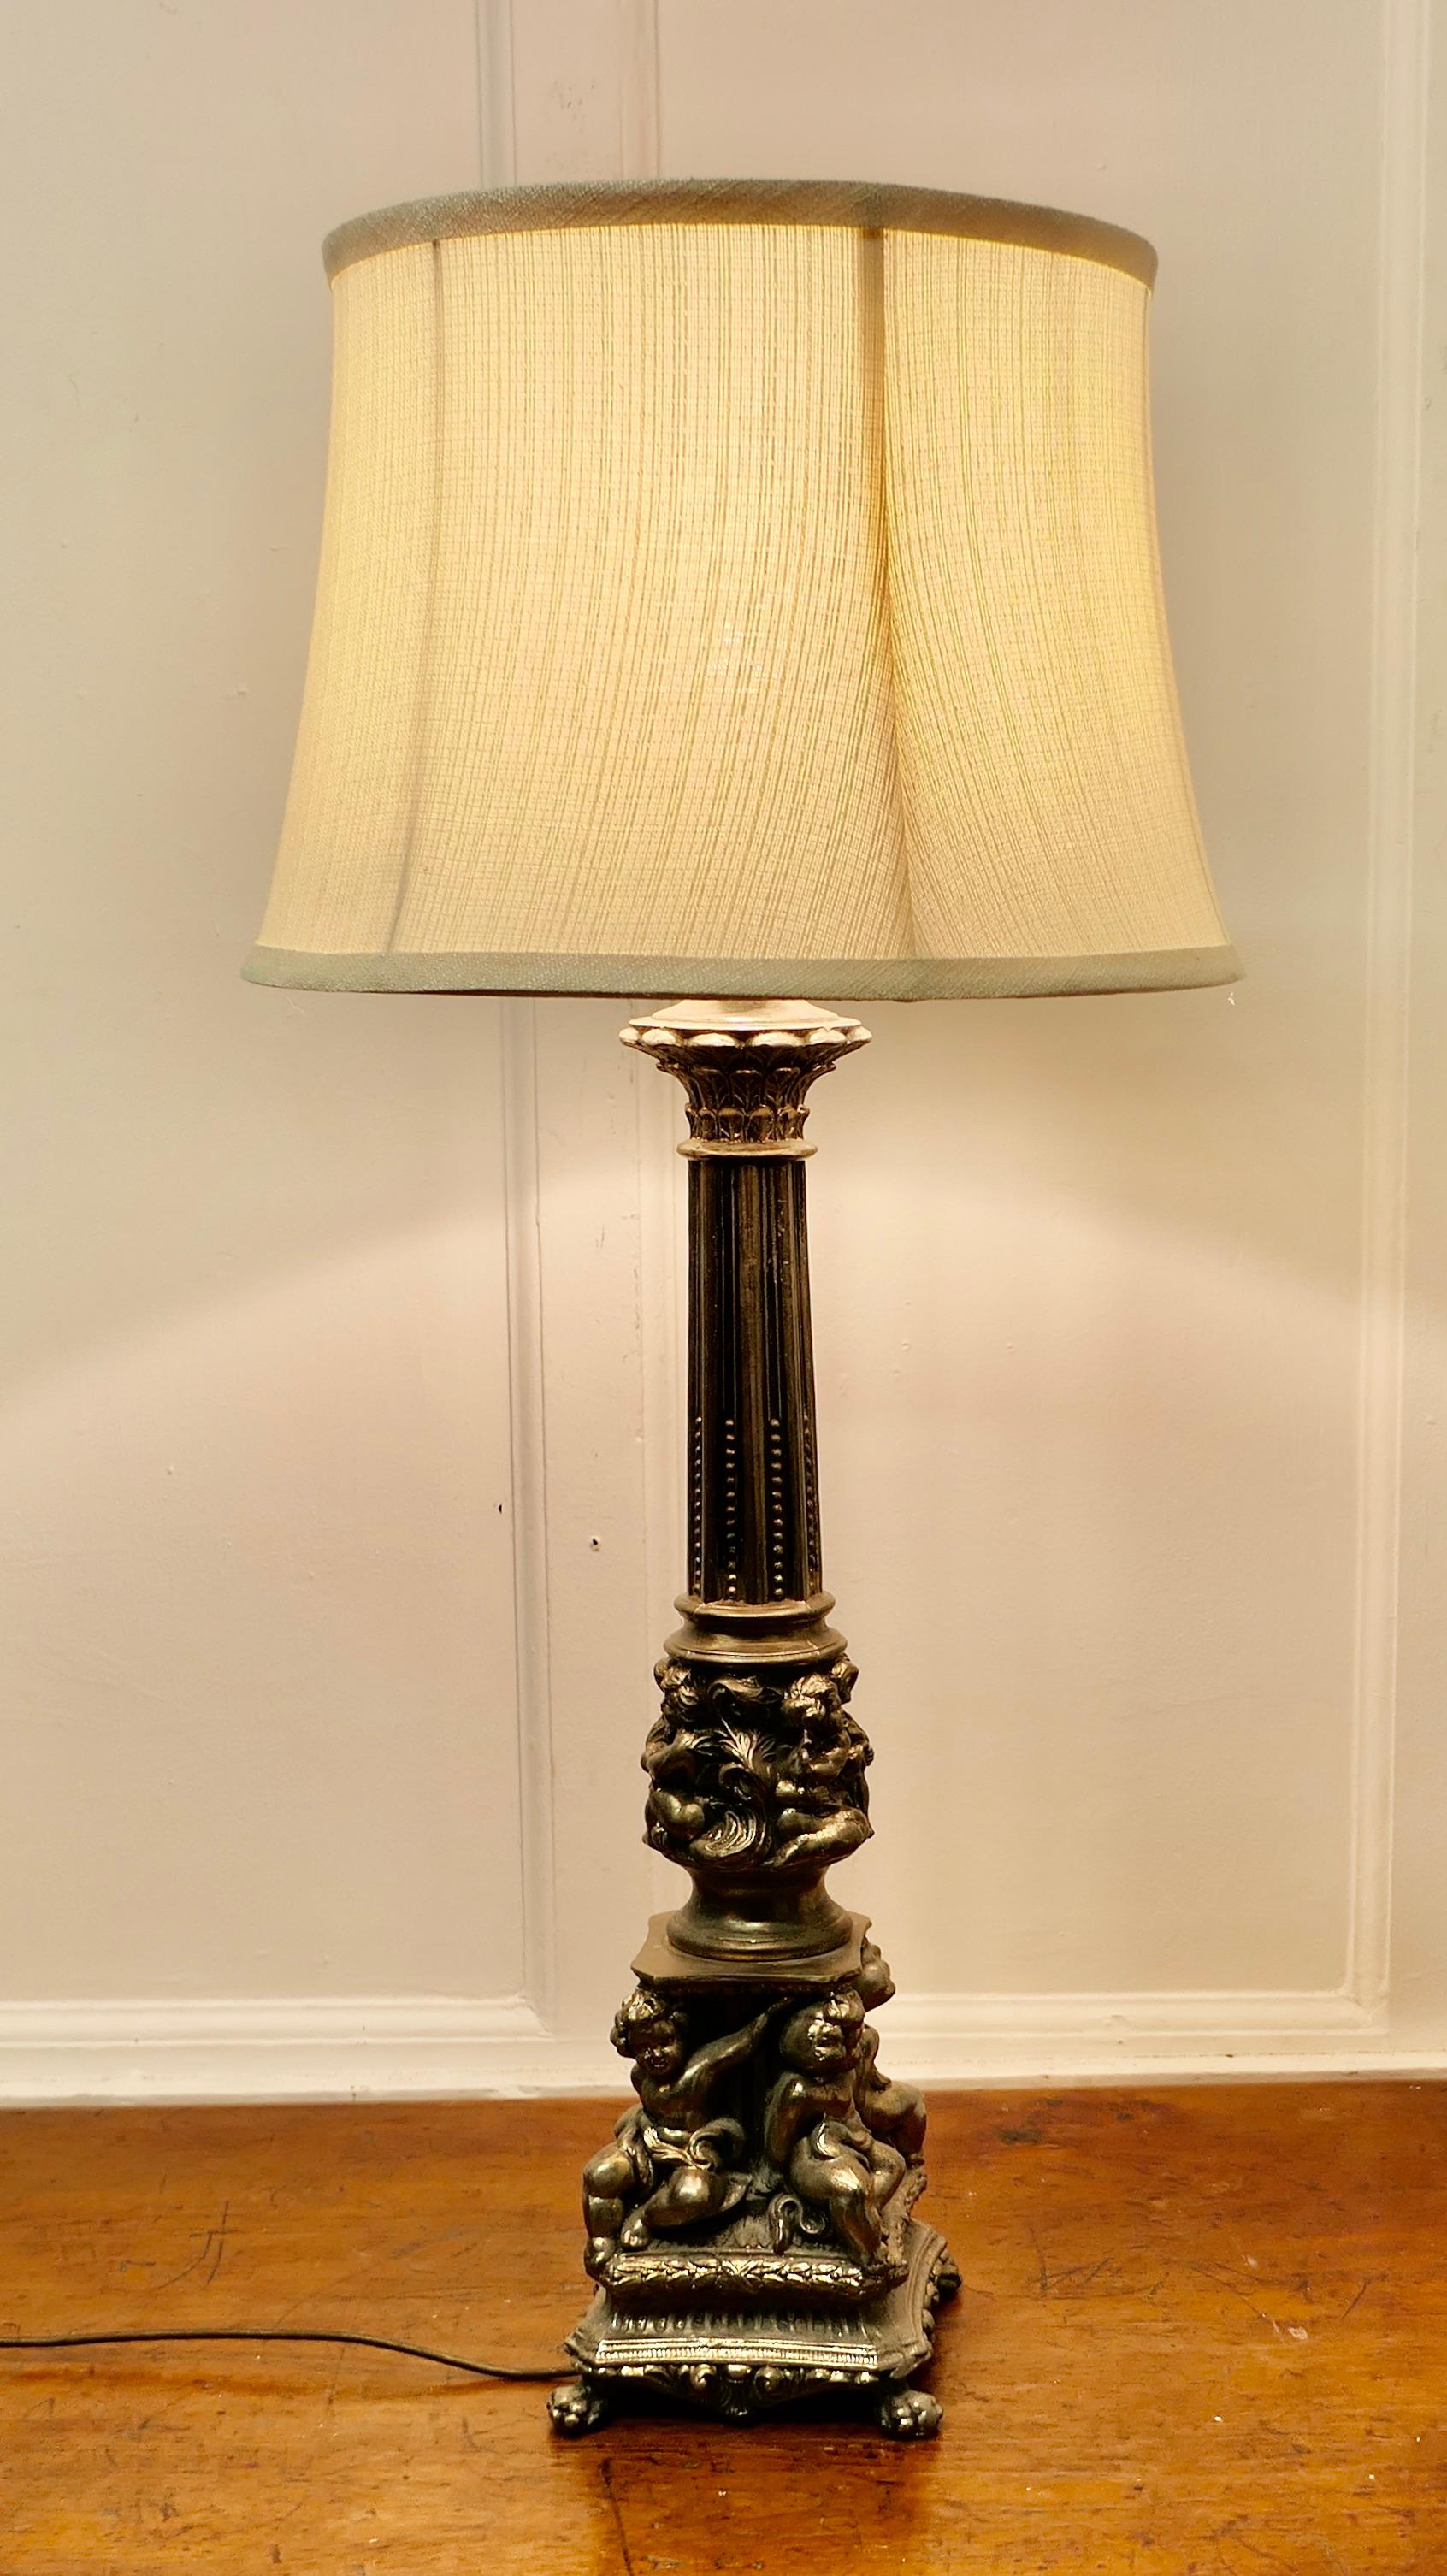 Tall Silver Gilt Metal Table Lamp with Putti

This lamp is made in silver gilt metal, and it has a Corinthian column to the centre with playful cherubs around the stepped base
The Lamp shade can be included if requested 
The lamp is 25” tall, and 6”